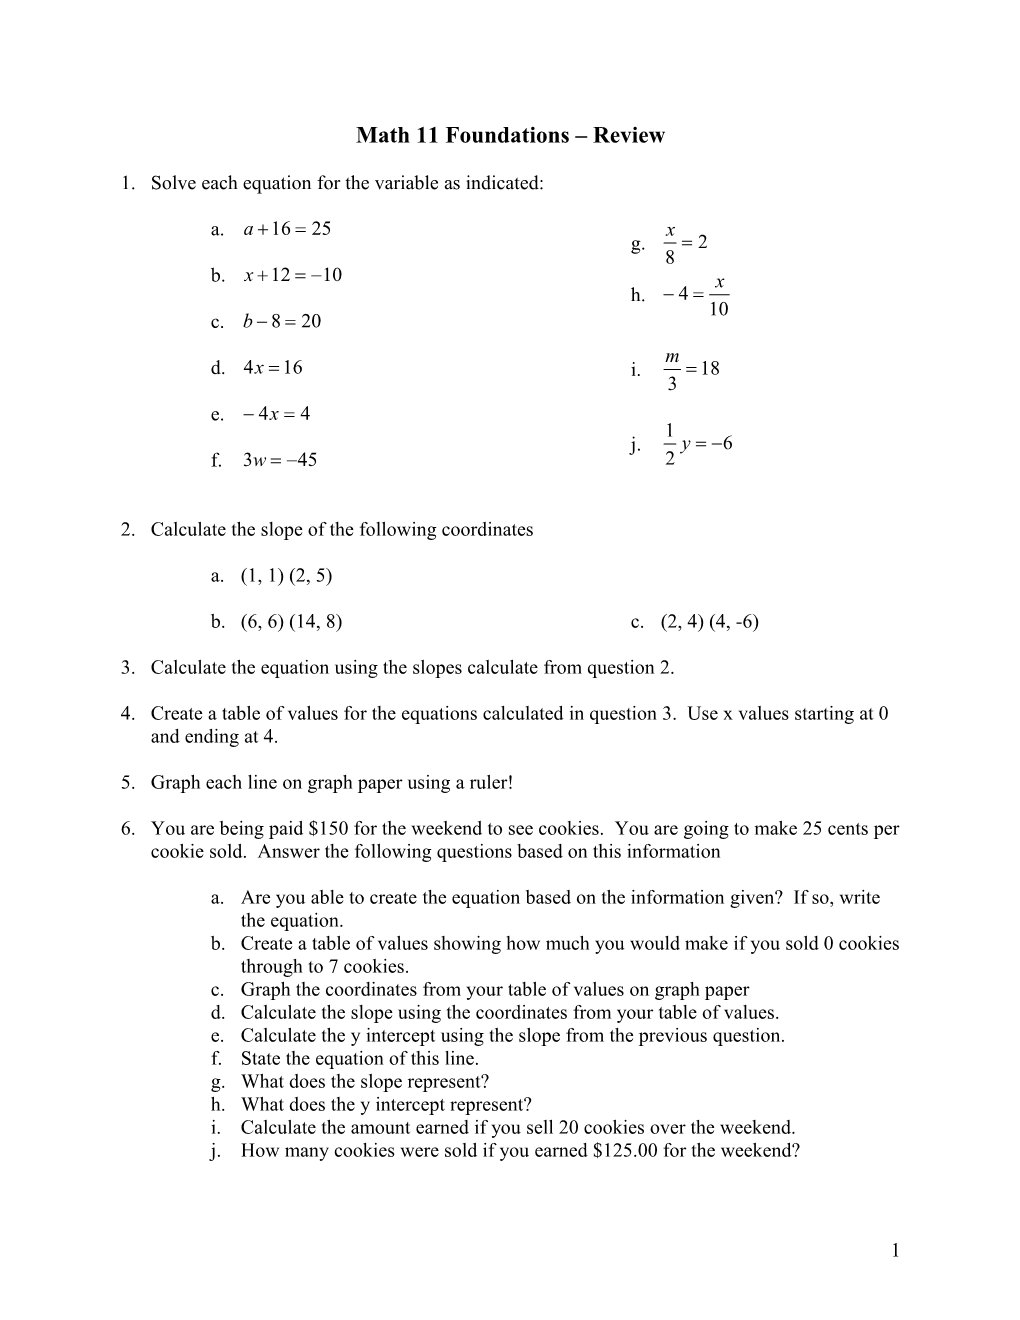 Math 11 Foundations Review